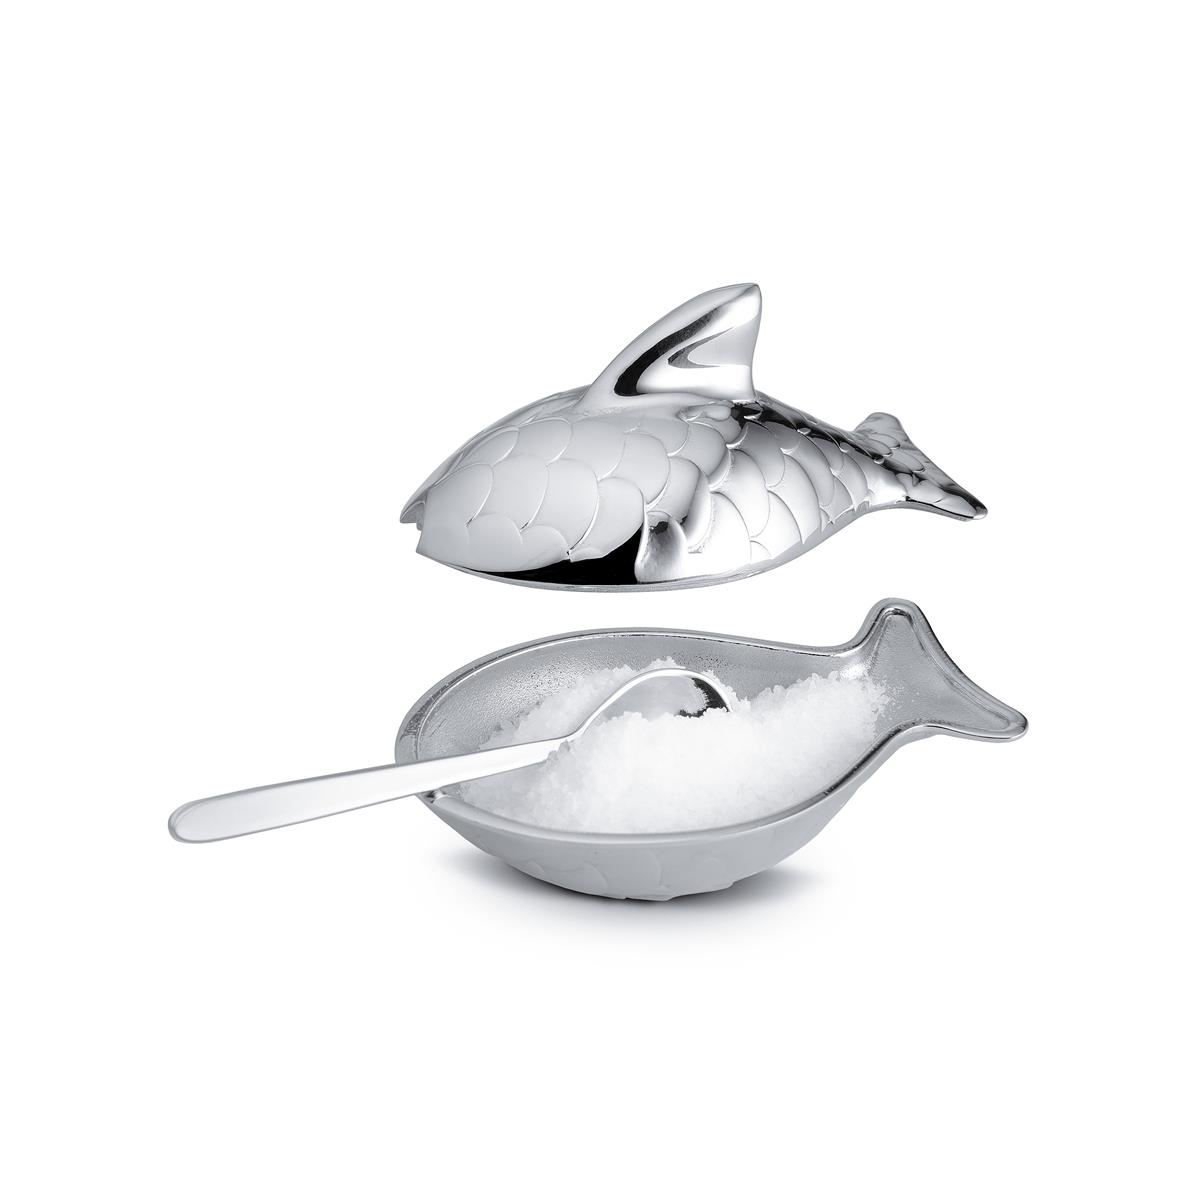 Alessi-Human collection Salad bowl in 18/10 stainless steel